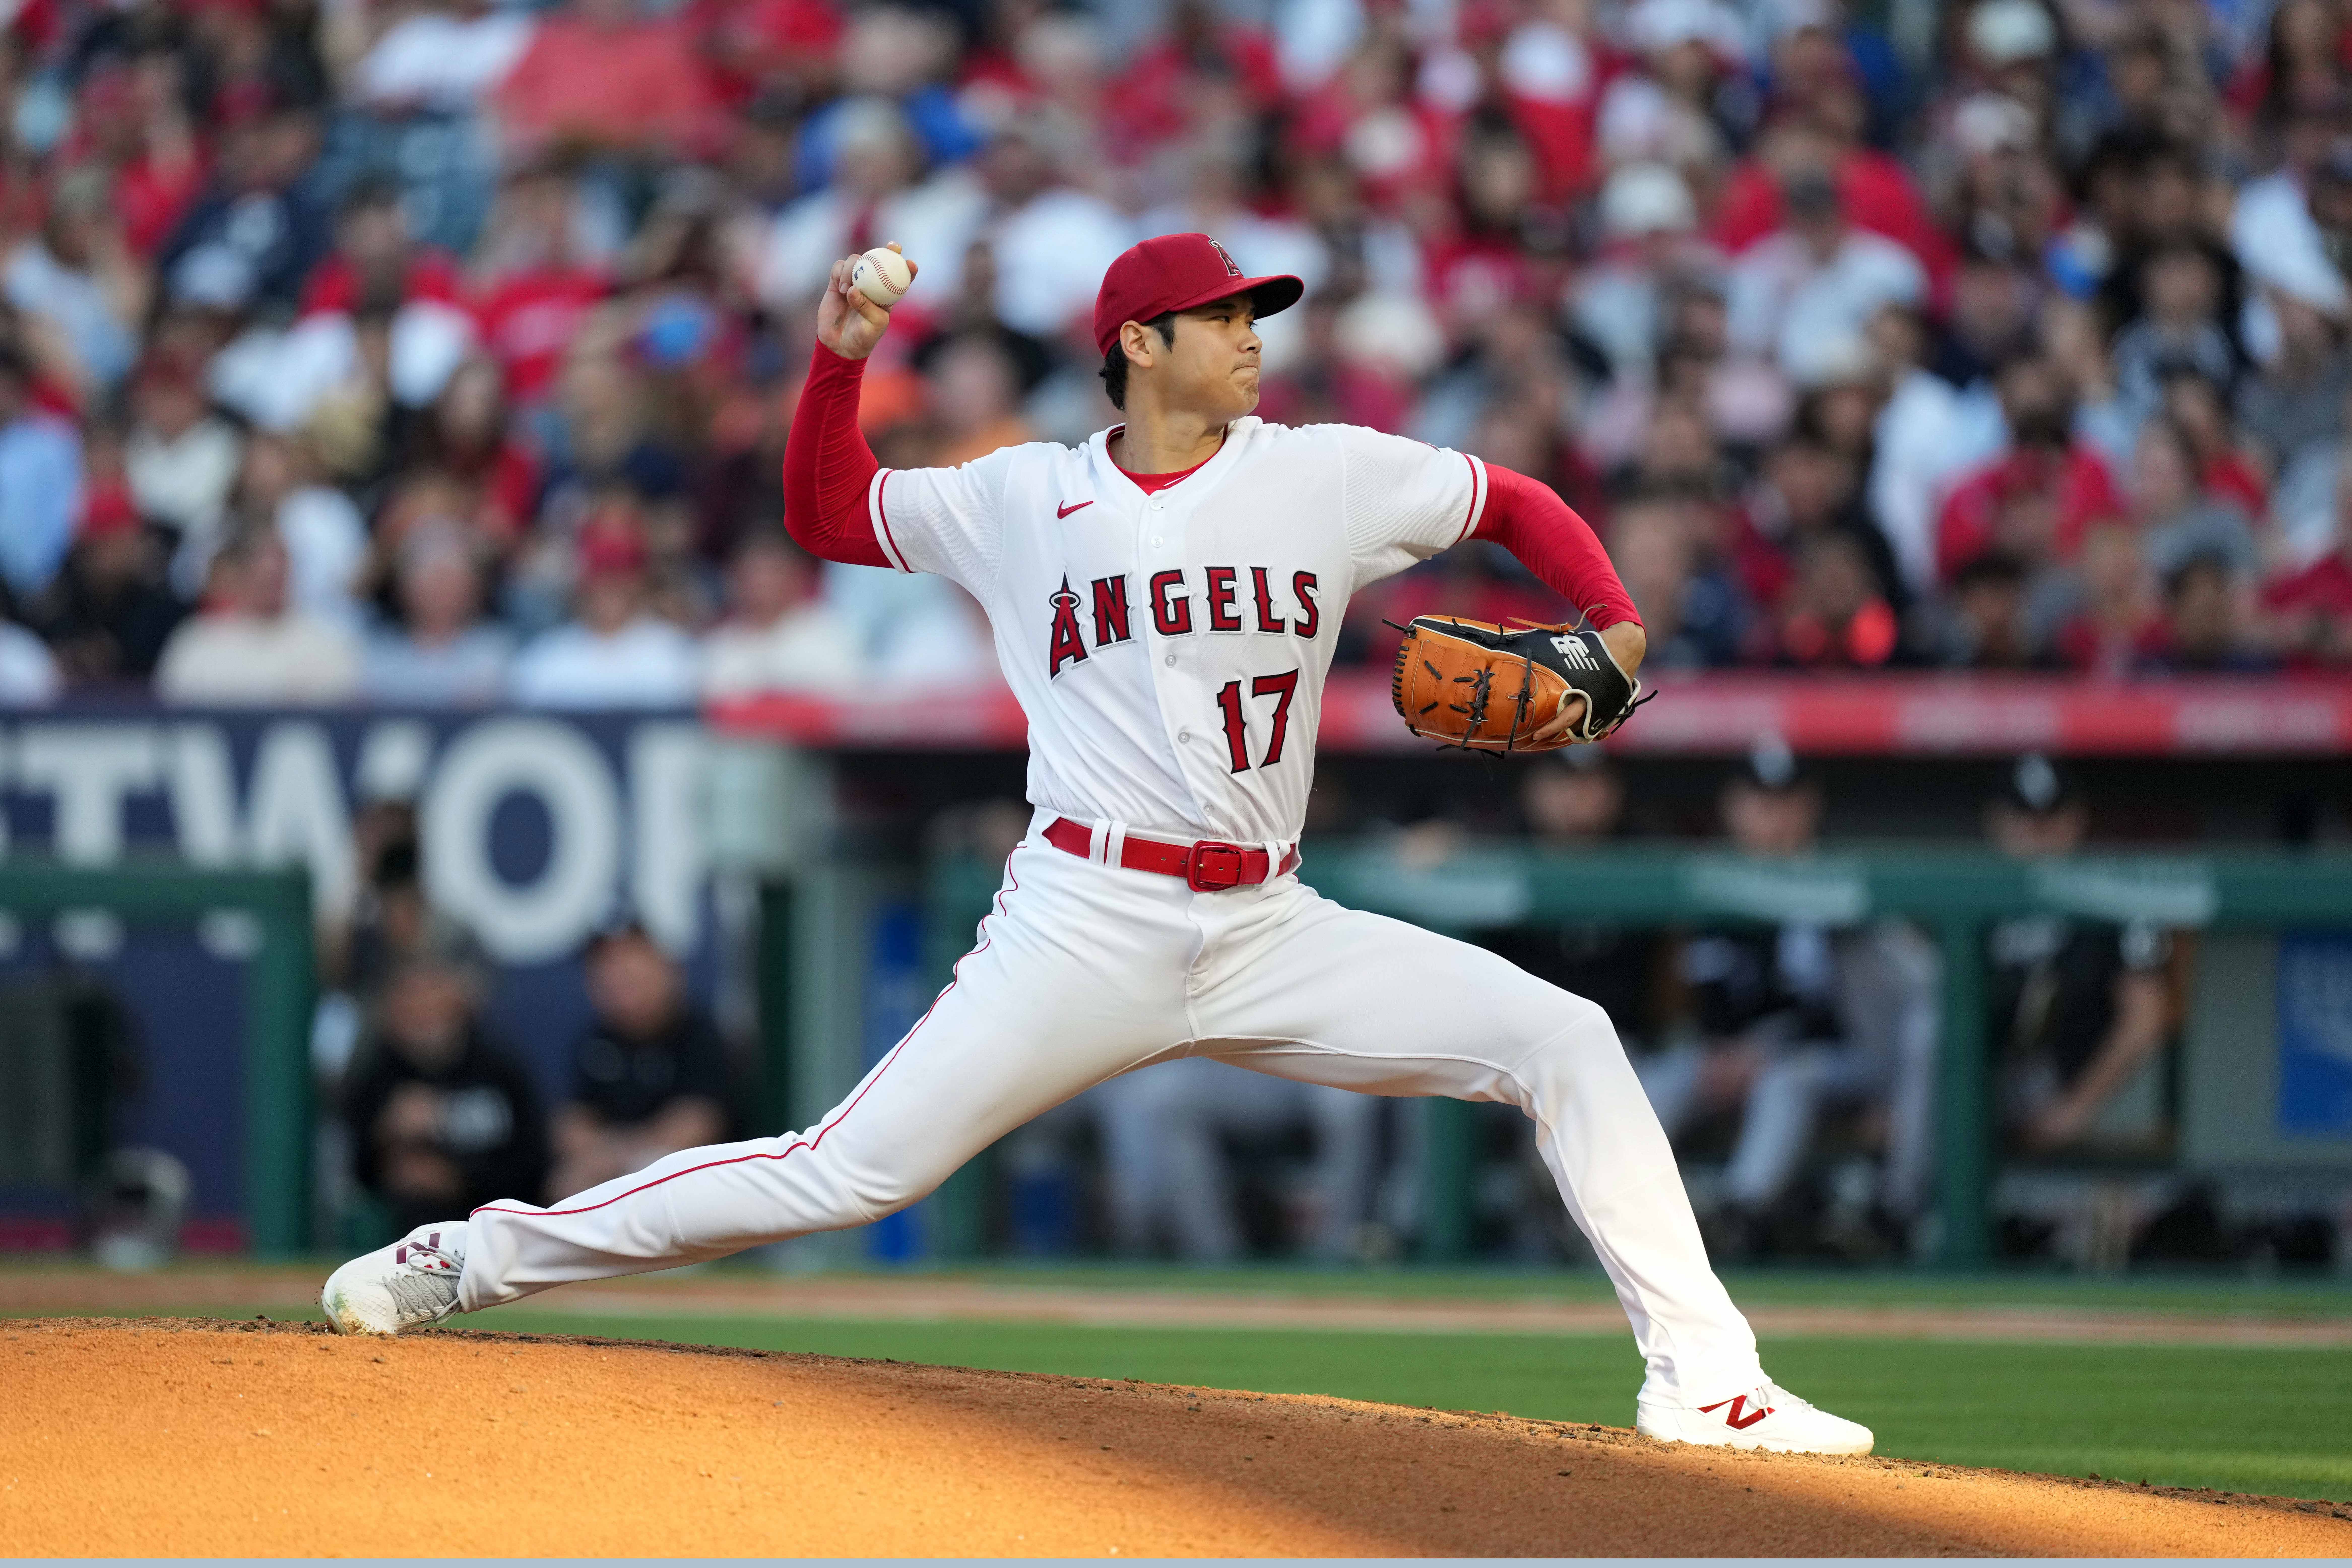 Rays will make a call on Shohei Ohtani. But a deal? Don't count on it.